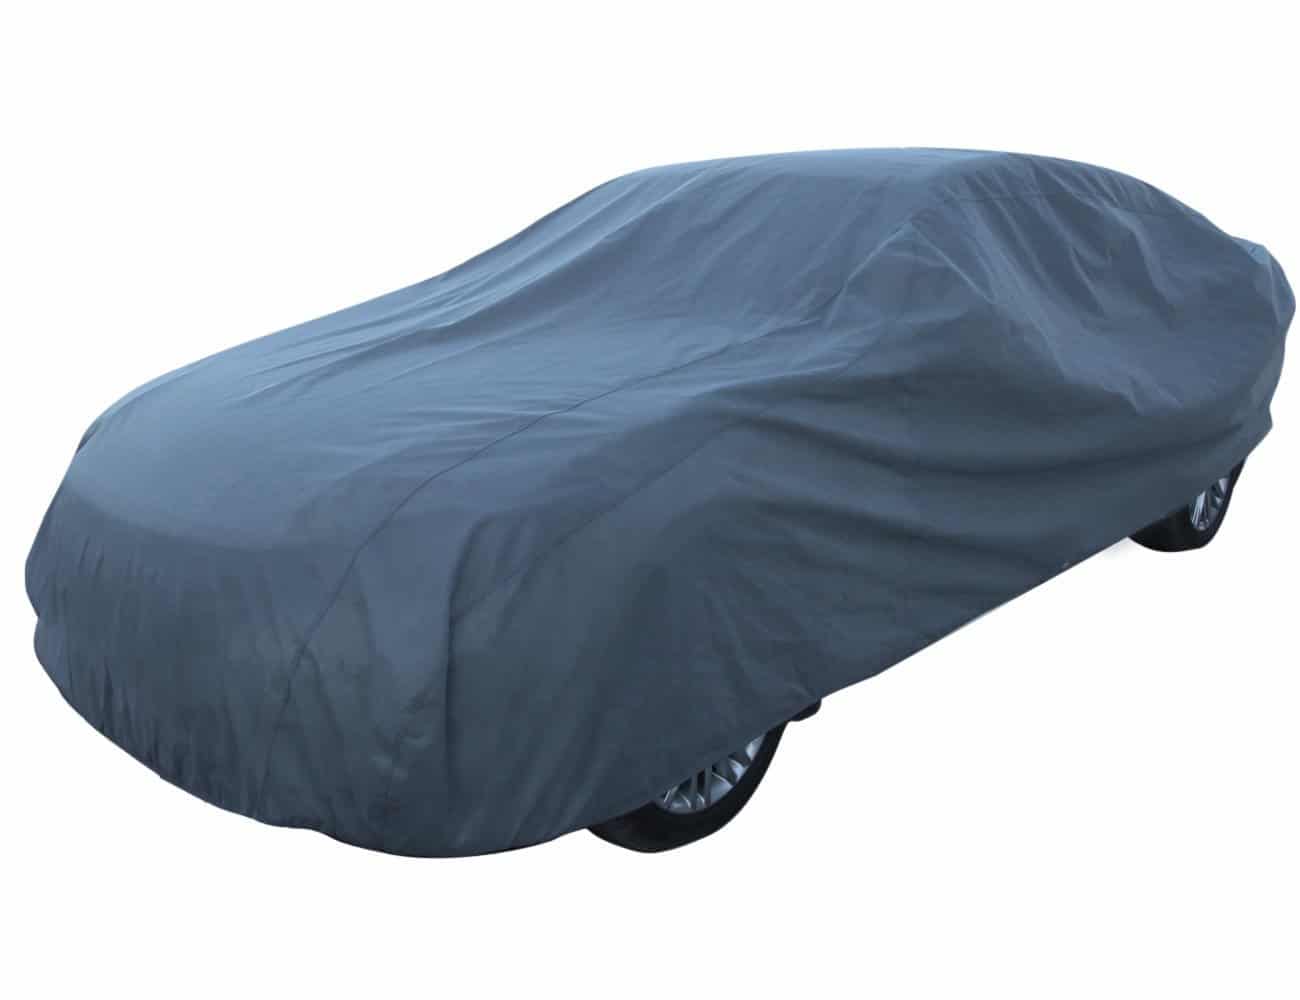 Review of Leader International Basic Guard 3 Layer Car Cover